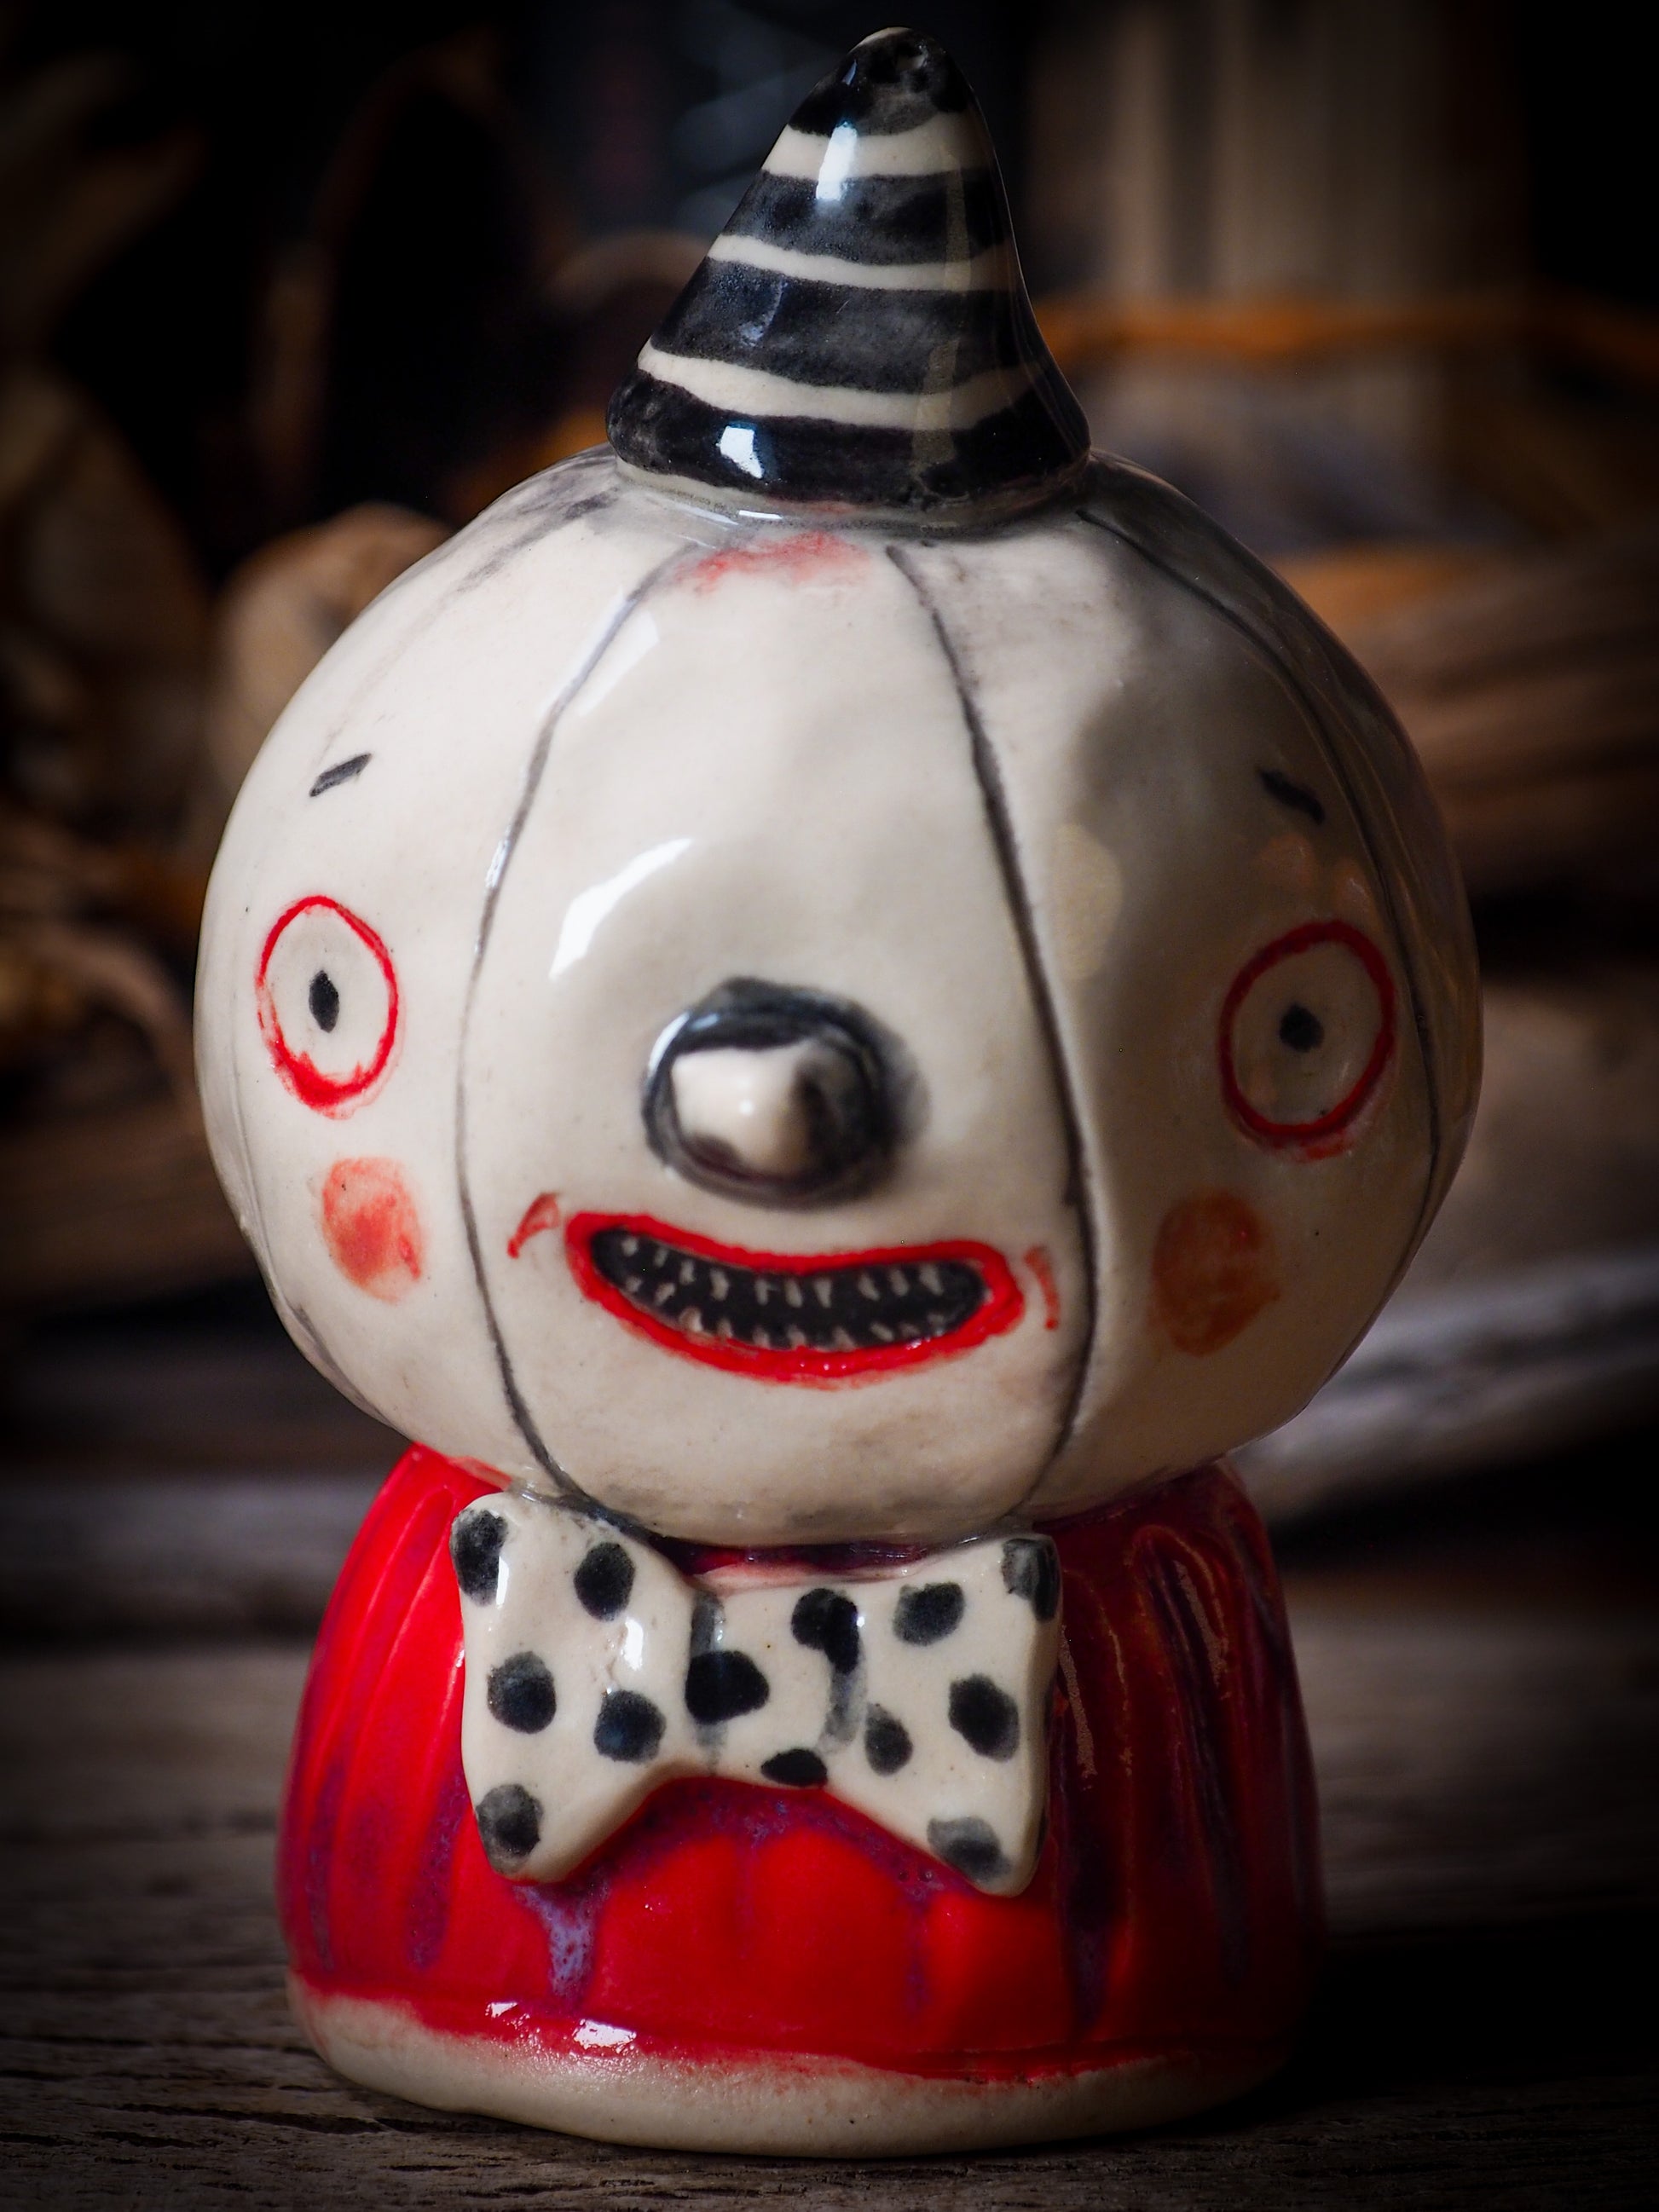 Fire glazed ceramic figurine by Idania Salcido, Danita Art. On Halloween, Danita creates spooky cute hand made ceramic figures to decorate your home in the scariest holiday of the year. Ghosts, witches, ghouls, vampires, black cats and other creatures of the night come to life in glazed ceramic home decor.